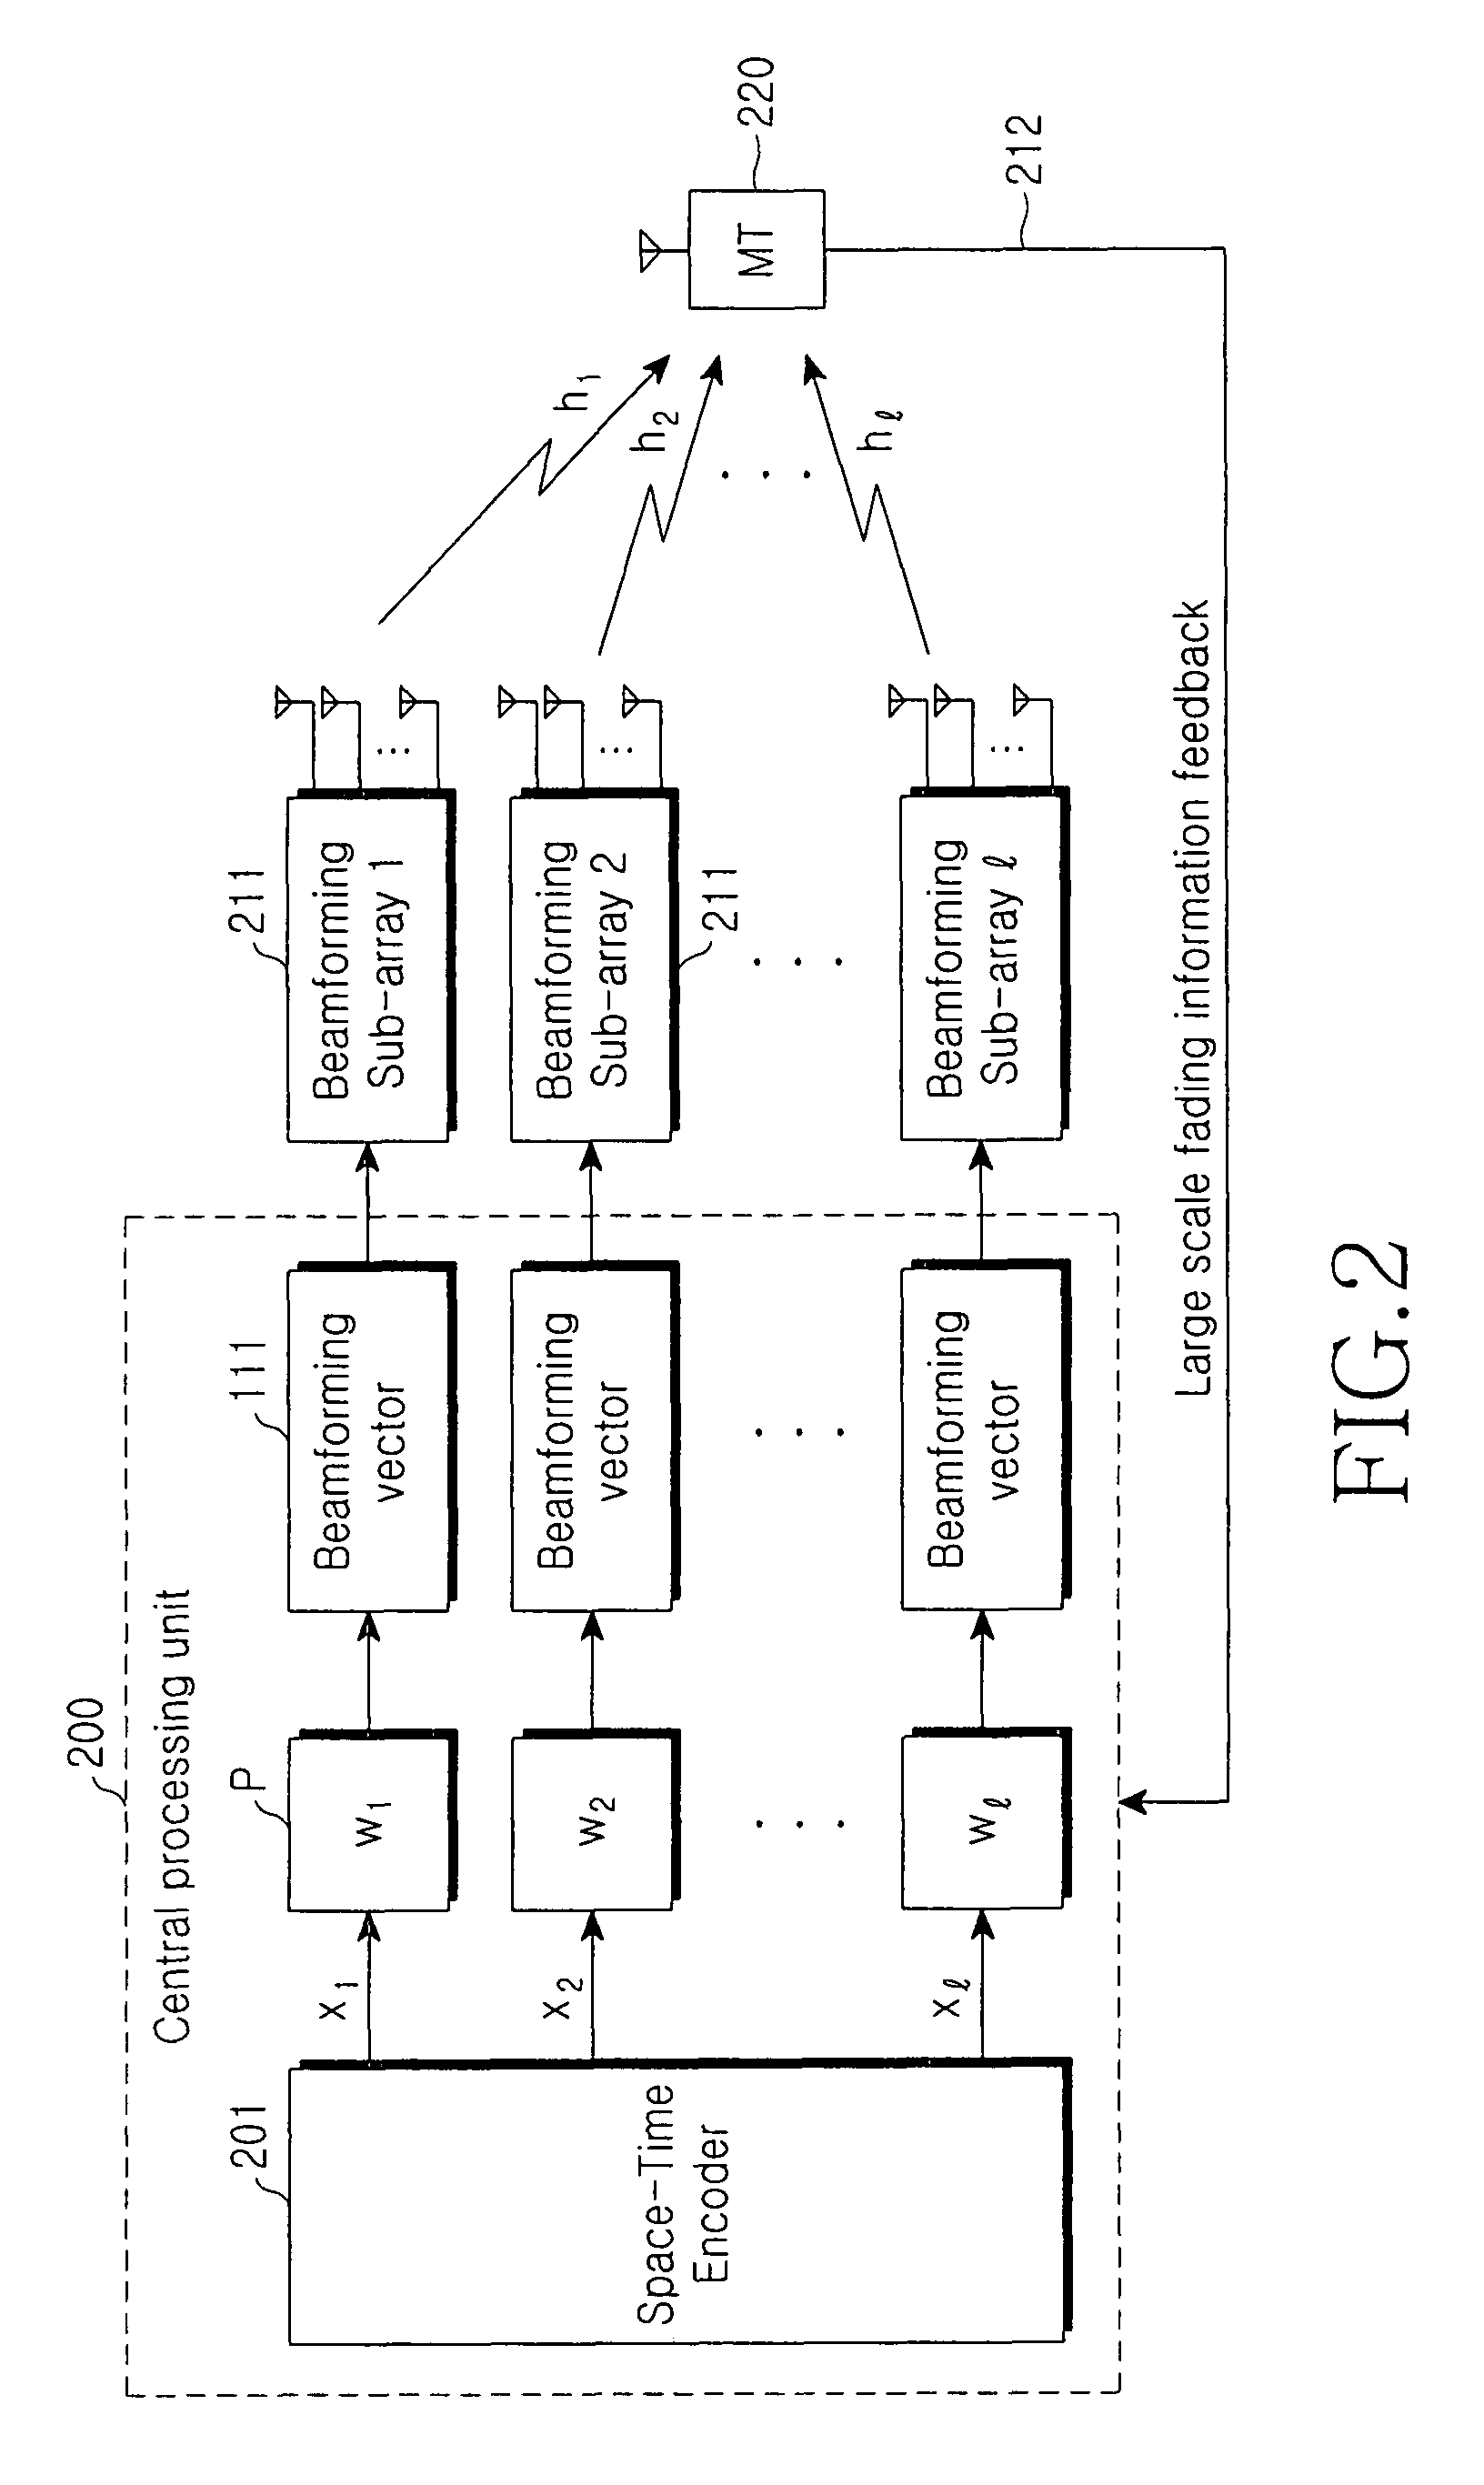 Method and apparatus of adaptively allocating transmission power for beamforming combined with orthogonal space-time block codes based on symbol error rate in distributed wireless communication system